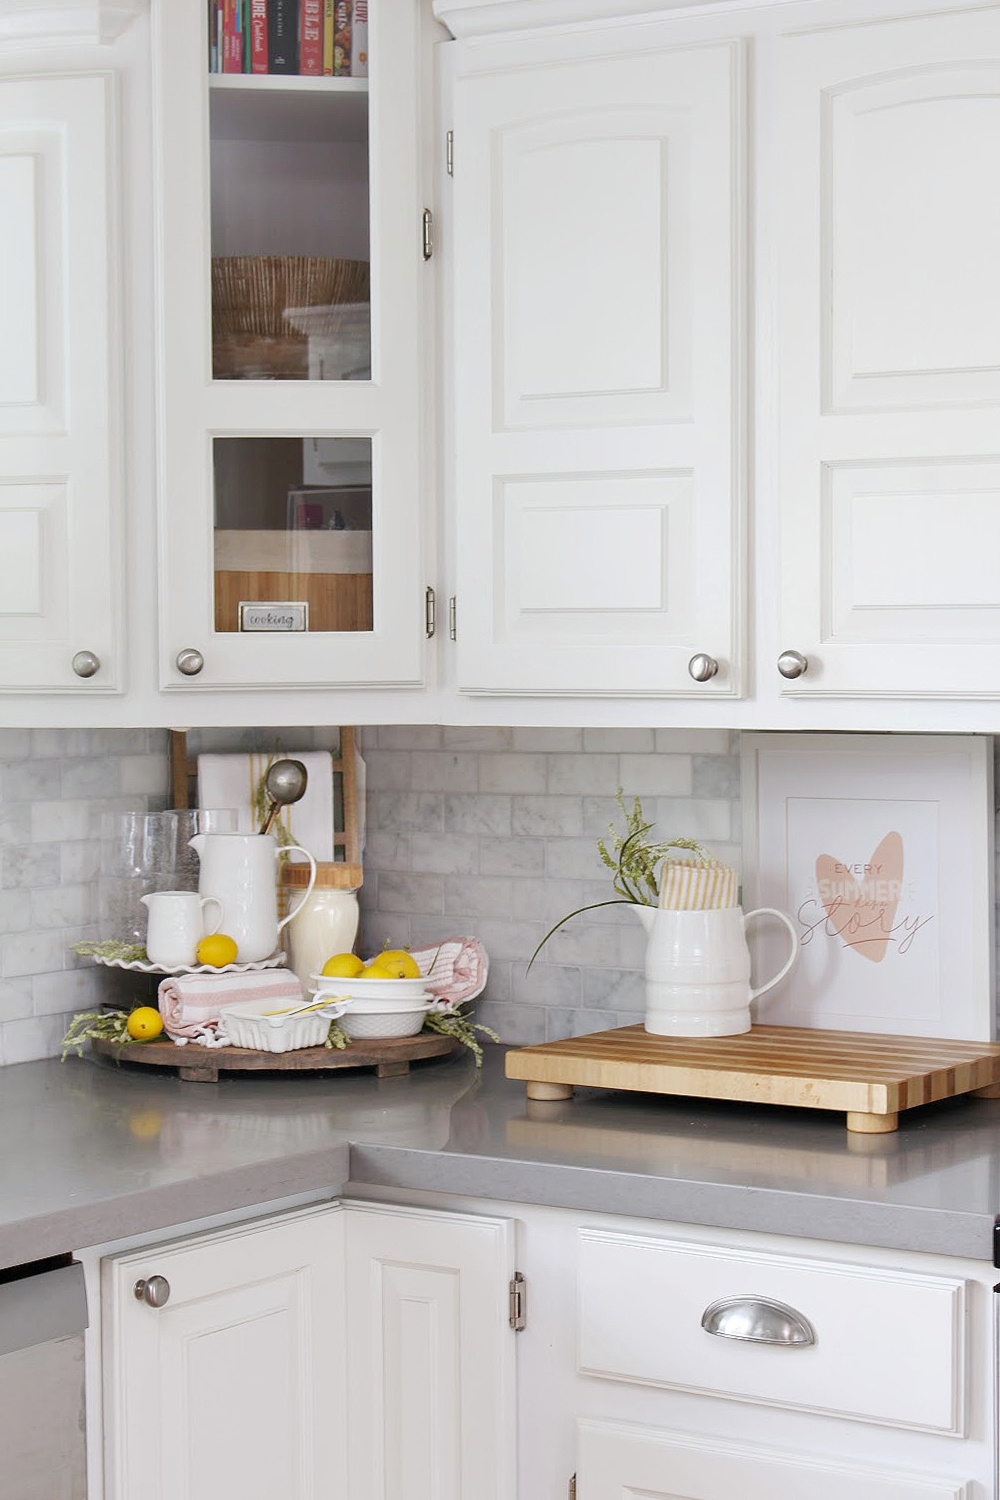 White kitchen decorated for summer with pastels for a fresh look.